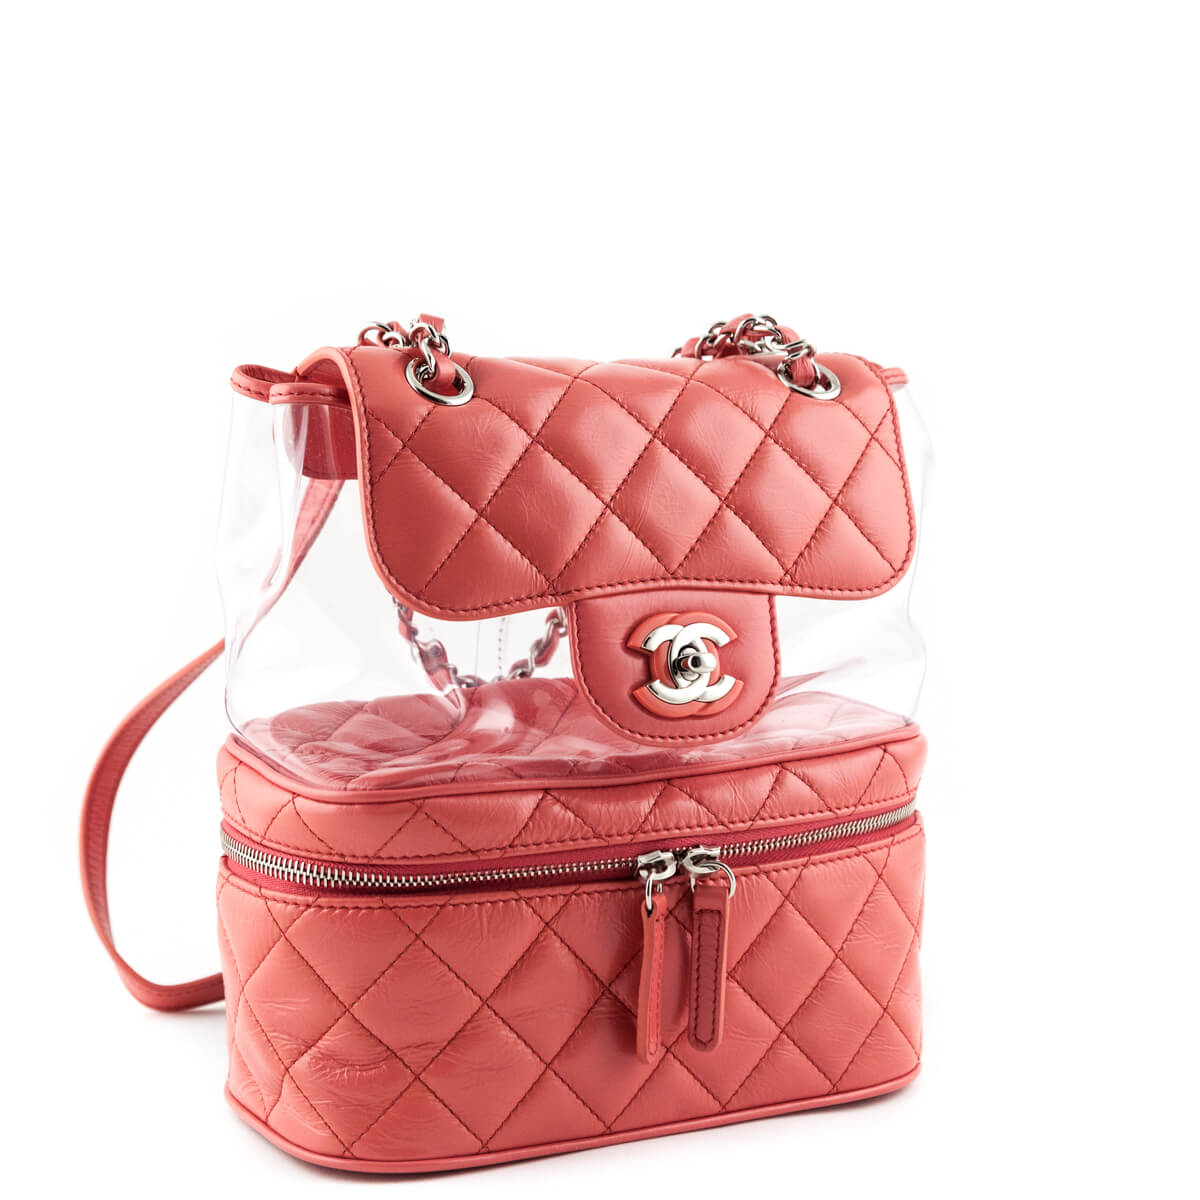 CHANEL Pink Suede Exterior Bags & Handbags for Women